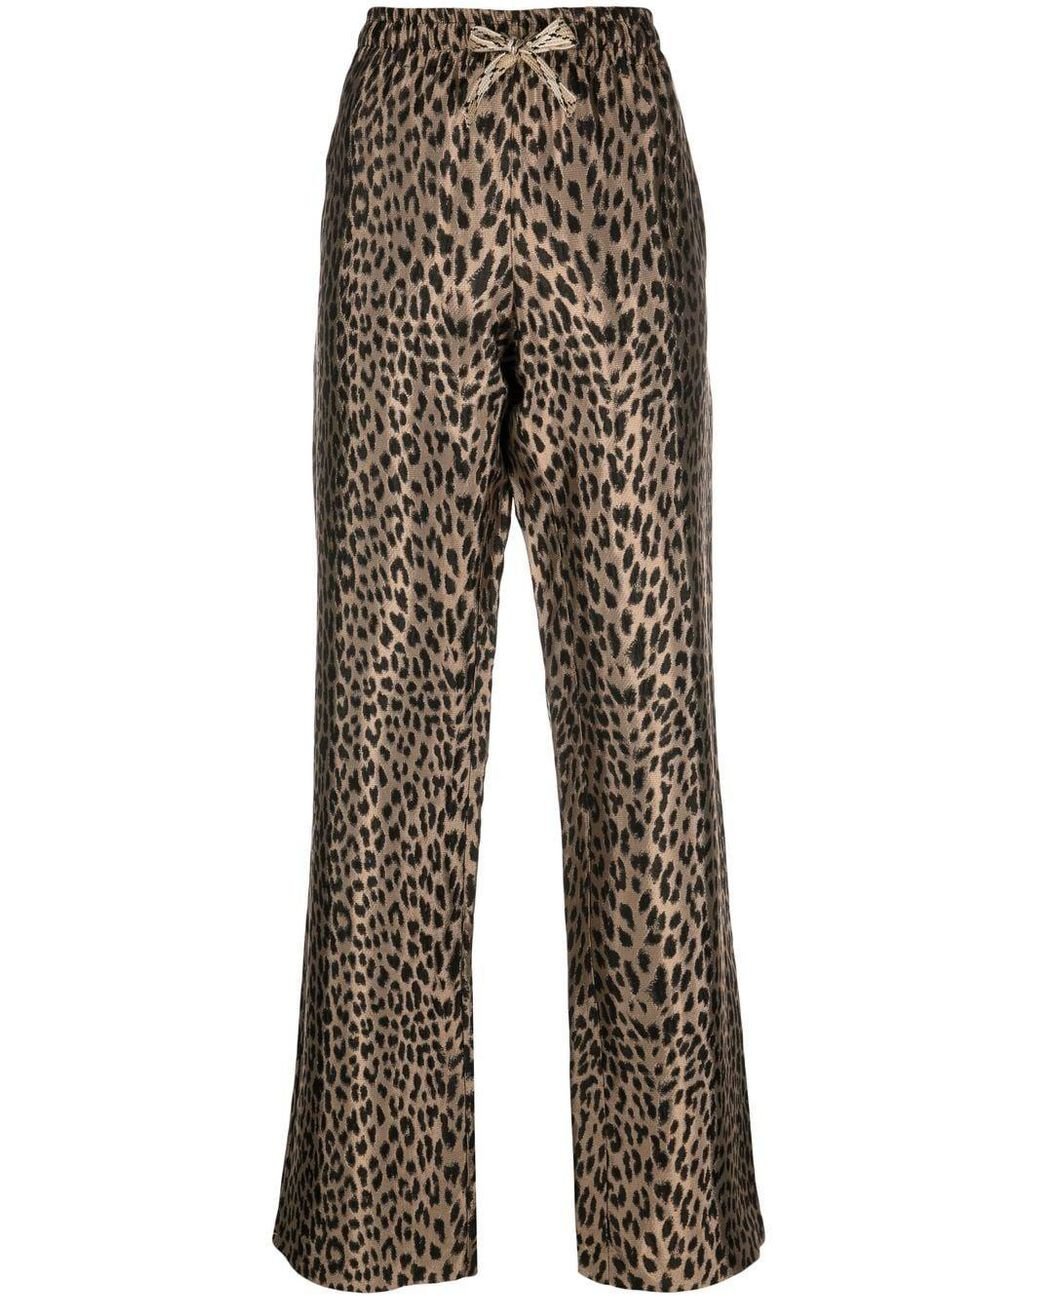 Zadig & Voltaire Leopard-print Trousers in Brown | Lyst